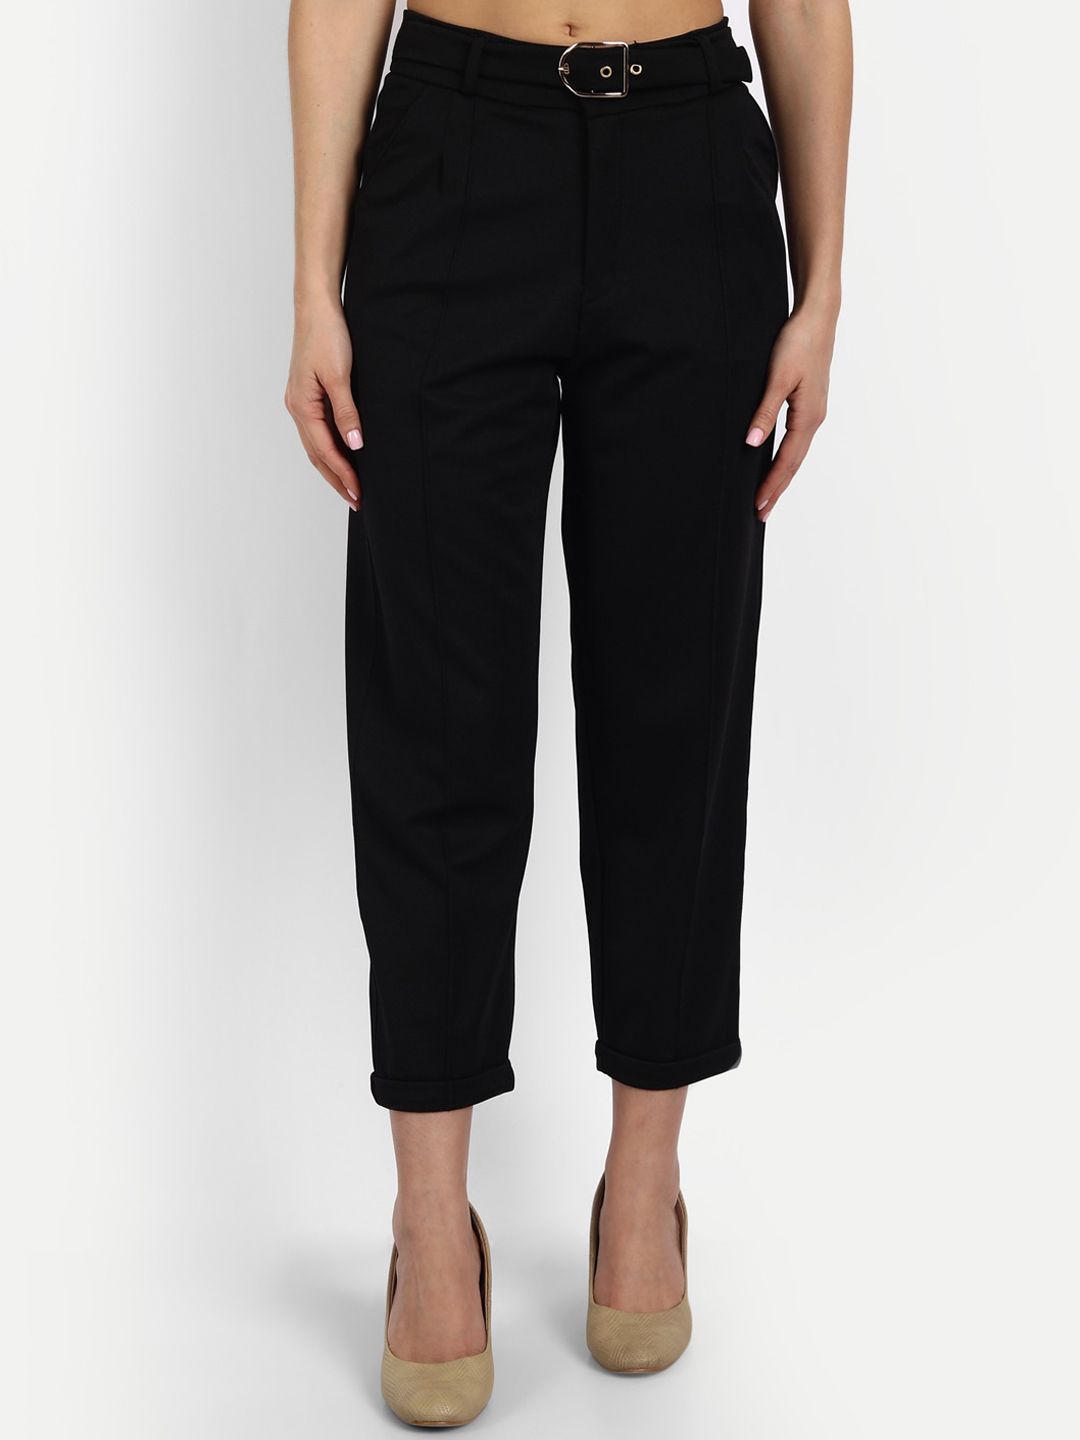 Next One Women Black Straight Fit High-Rise Pleated Trousers Price in India